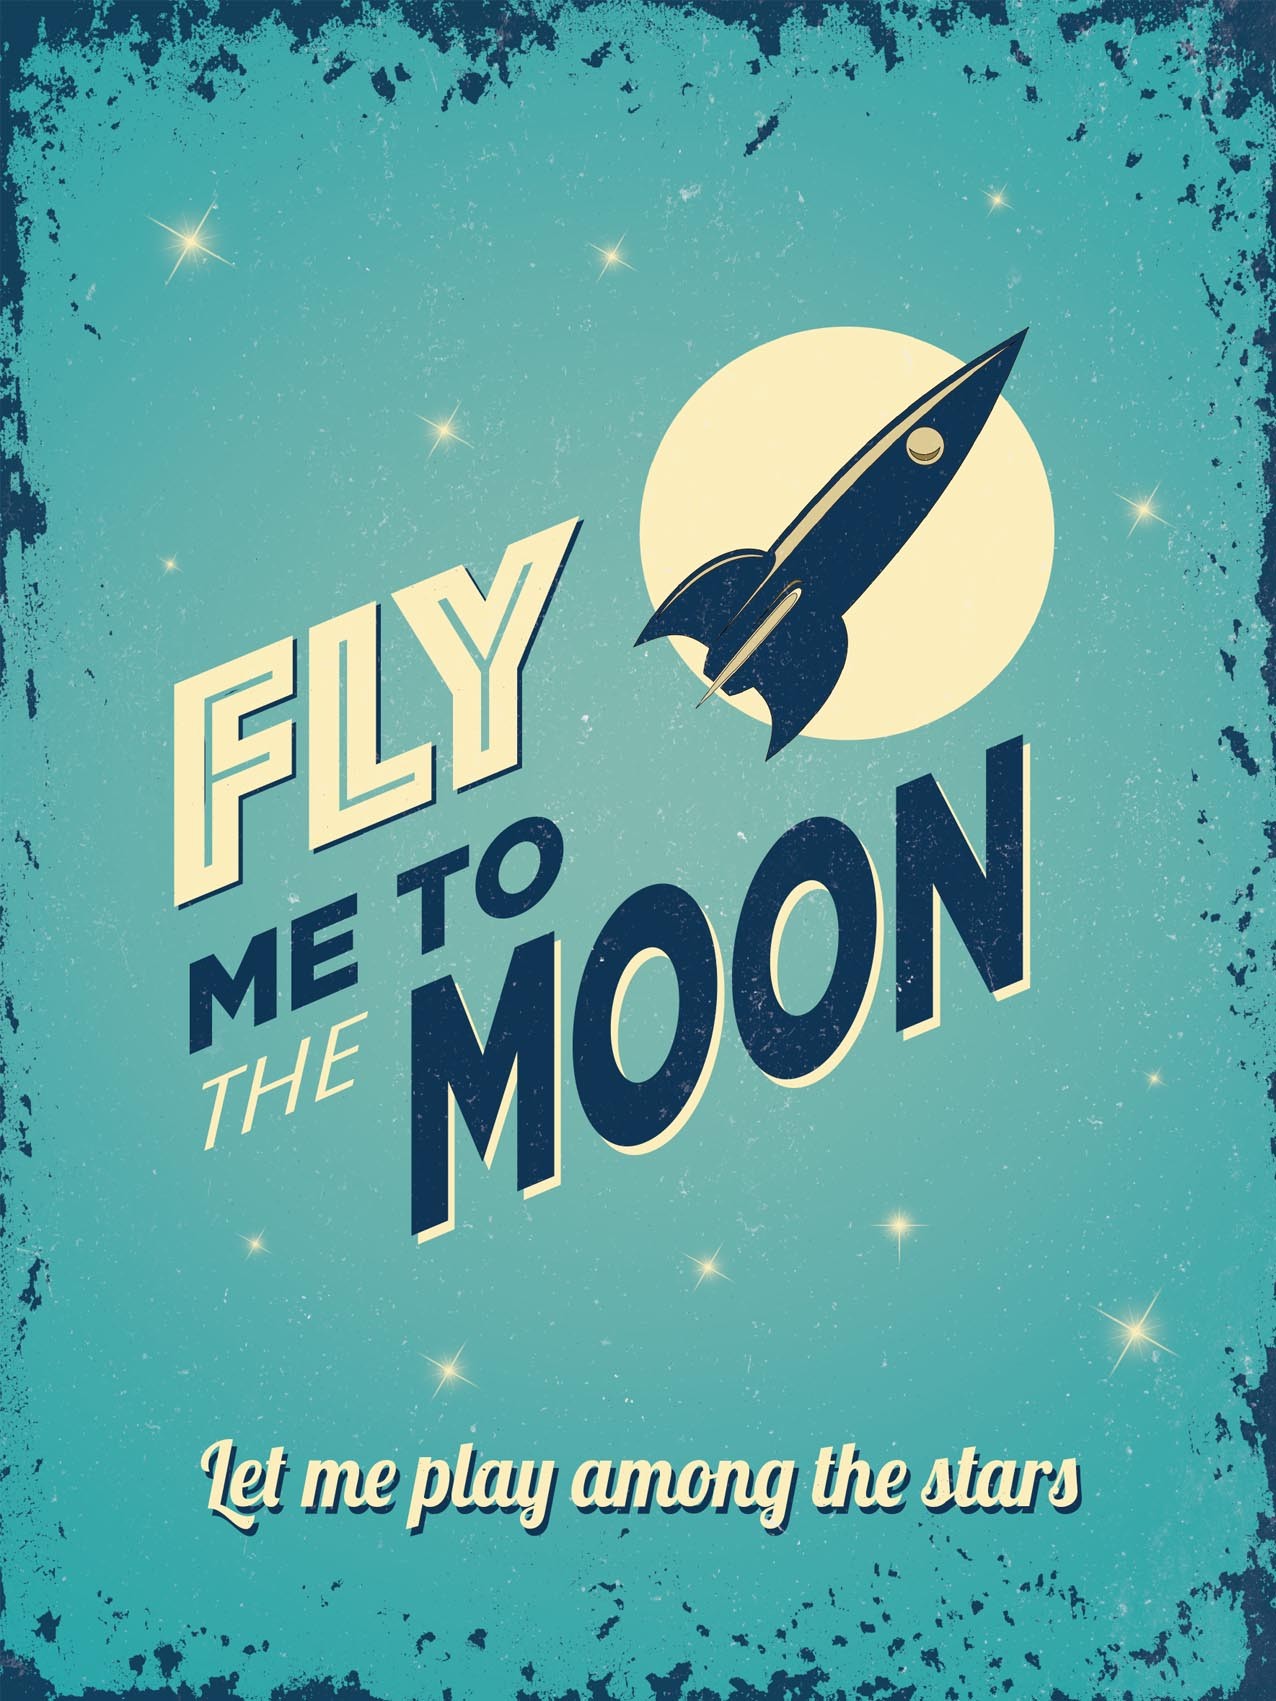 Fly Me To The Moon wallpapers, Movie, HQ Fly Me To The Moon pictures